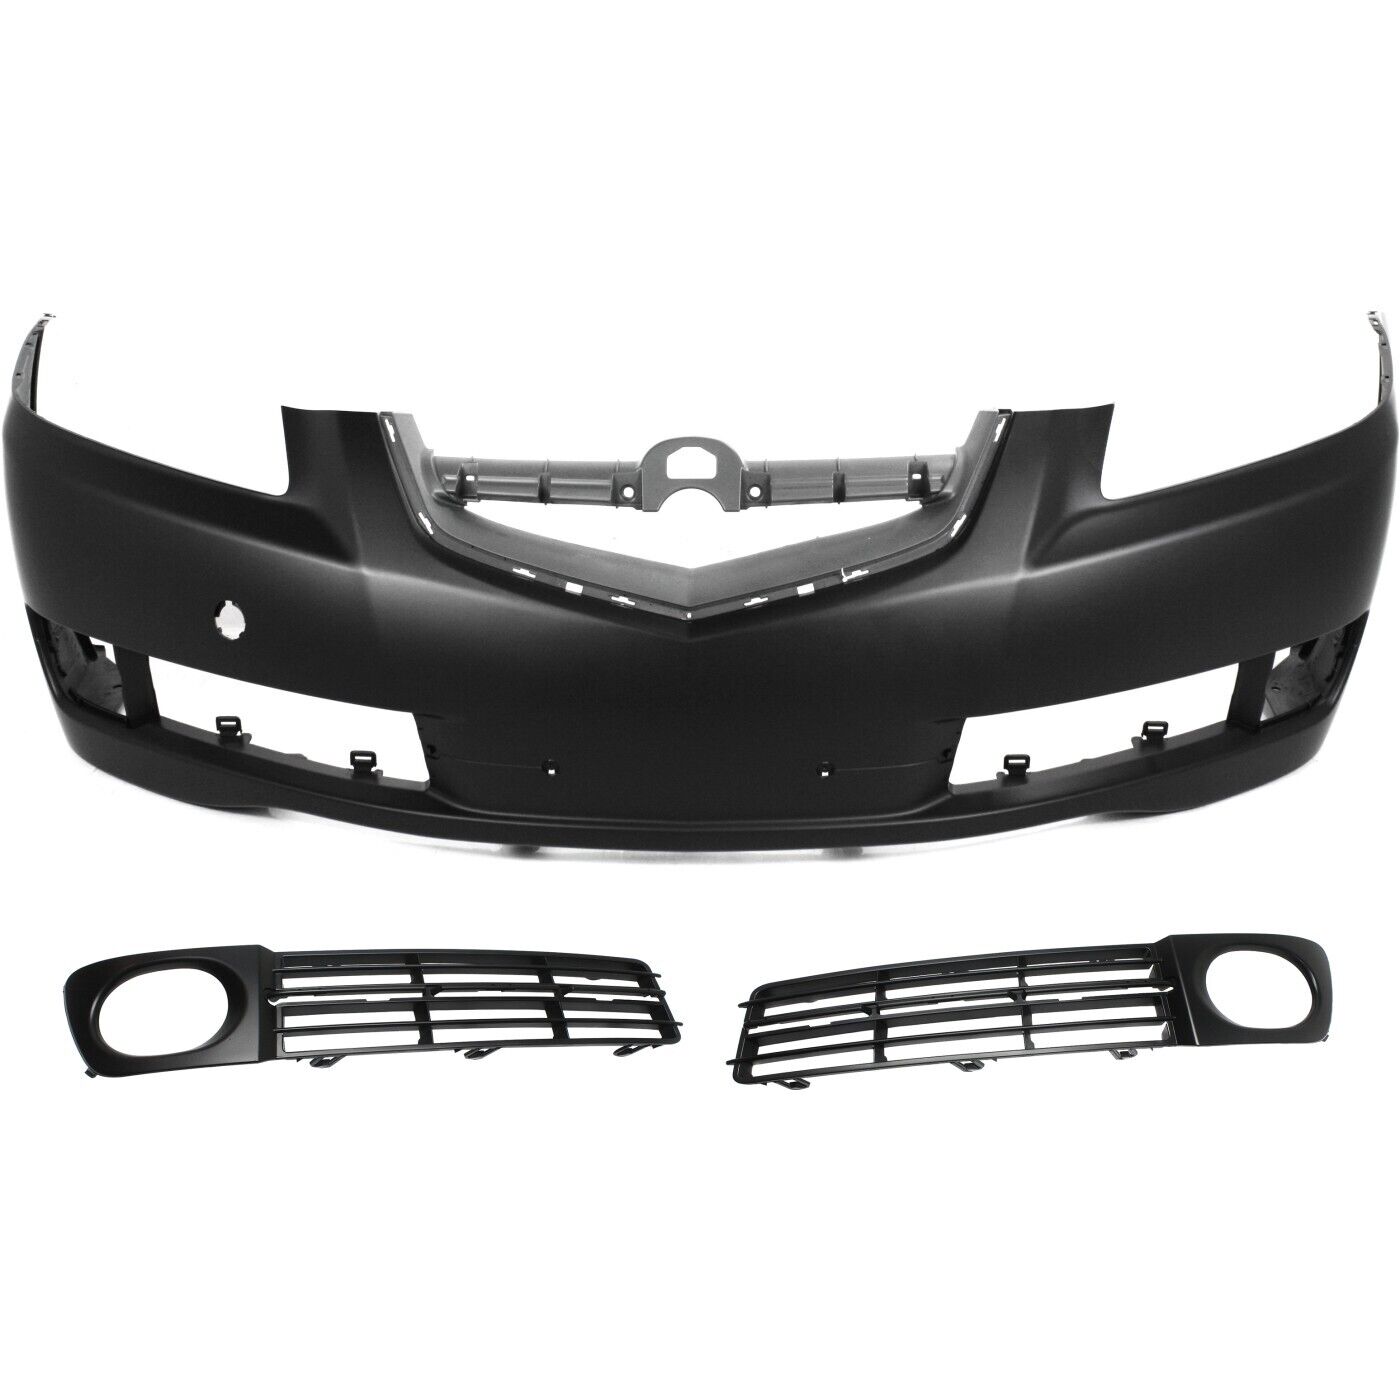 Front Bumper Cover Kit For 2007-2008 Acura TL Primed with Fog Light Trim 3.2L